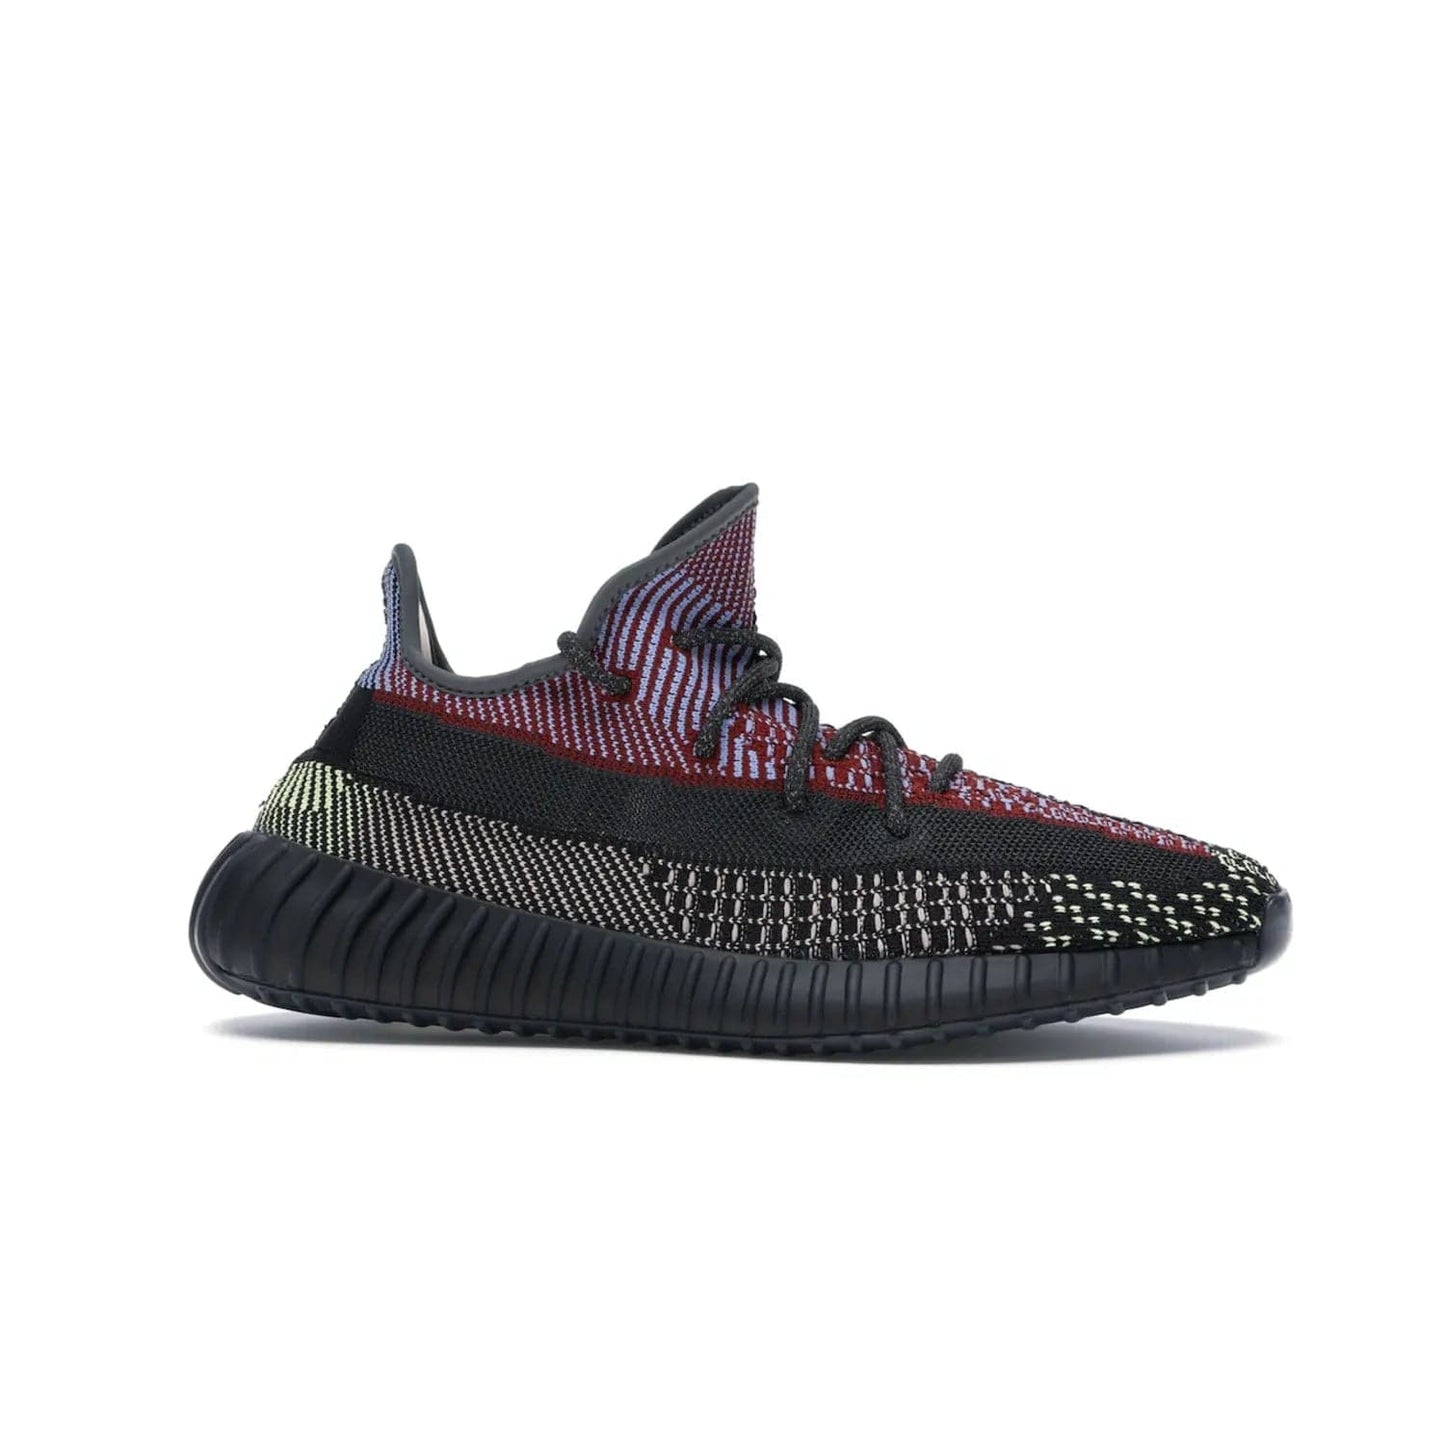 adidas Yeezy Boost 350 V2 Yecheil (Non-Reflective) - Image 2 - Only at www.BallersClubKickz.com - Make a statement with the eye-catching adidas Yeezy Boost 350 V2 Yecheil Non-Reflective. Featuring a spectrum of colorful hues, black upper, Boost cushioning, and black side stripe, the sneaker brings a luxe yet playful finish to any outfit.